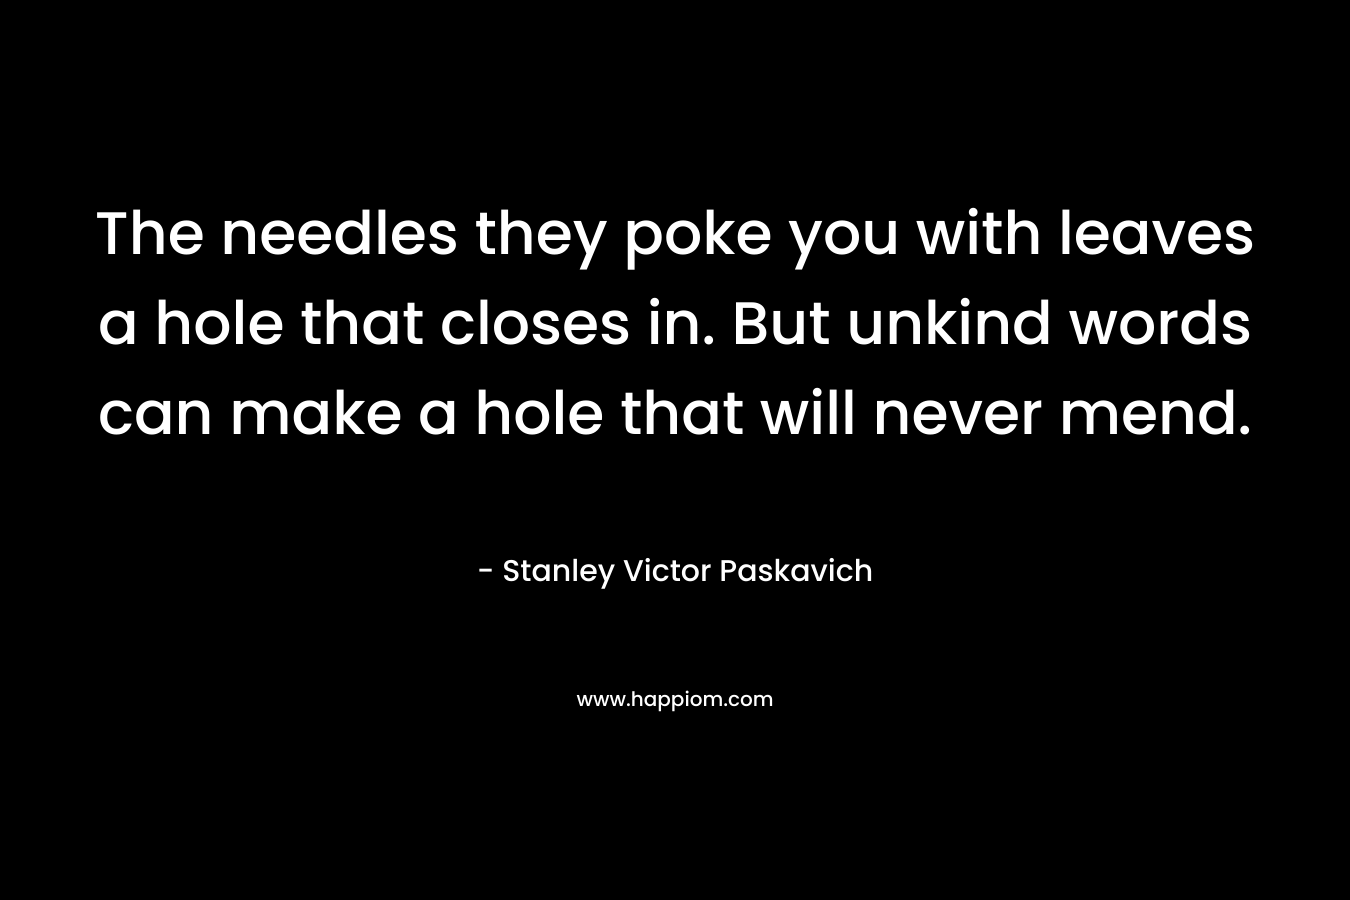 The needles they poke you with leaves a hole that closes in. But unkind words can make a hole that will never mend. – Stanley Victor Paskavich